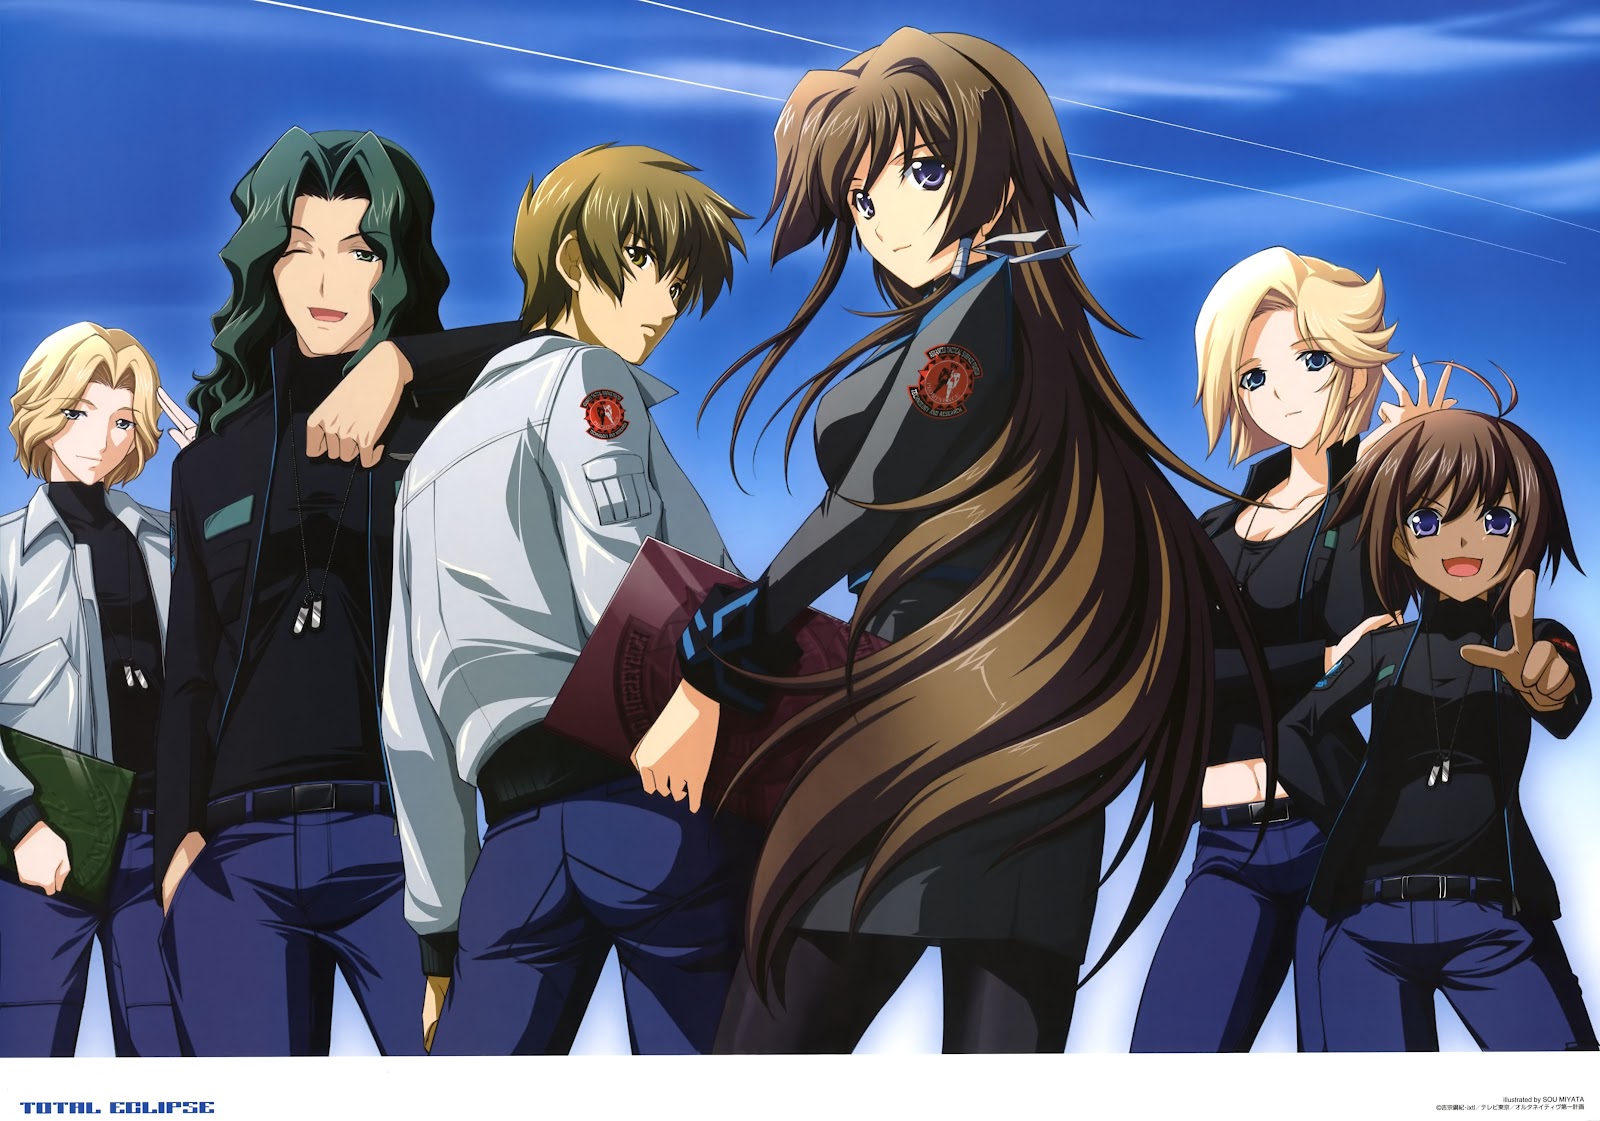 Rewriting Life: Muv-Luv Alternative: Total Eclipse Episode 04 - Inia ...